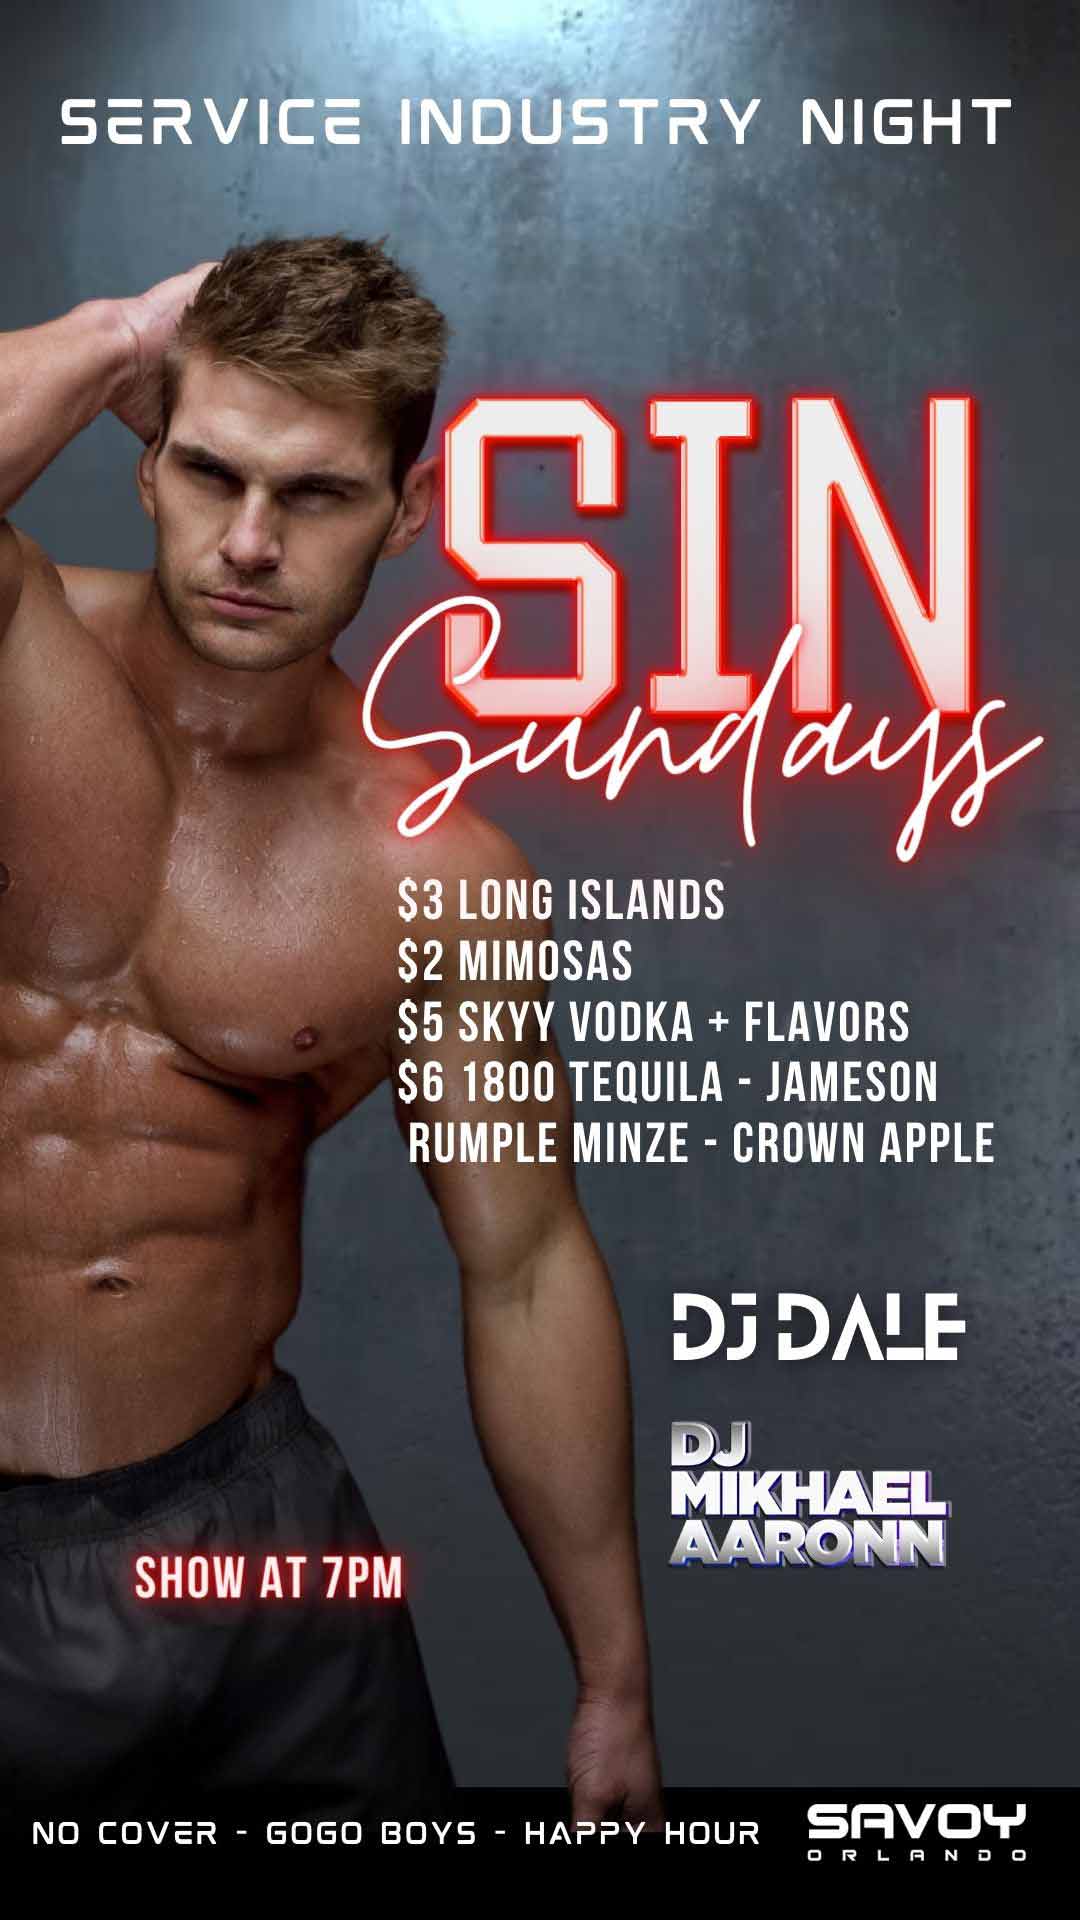 flyers about sunday nights events at savoy orlando drink specials and happy hour